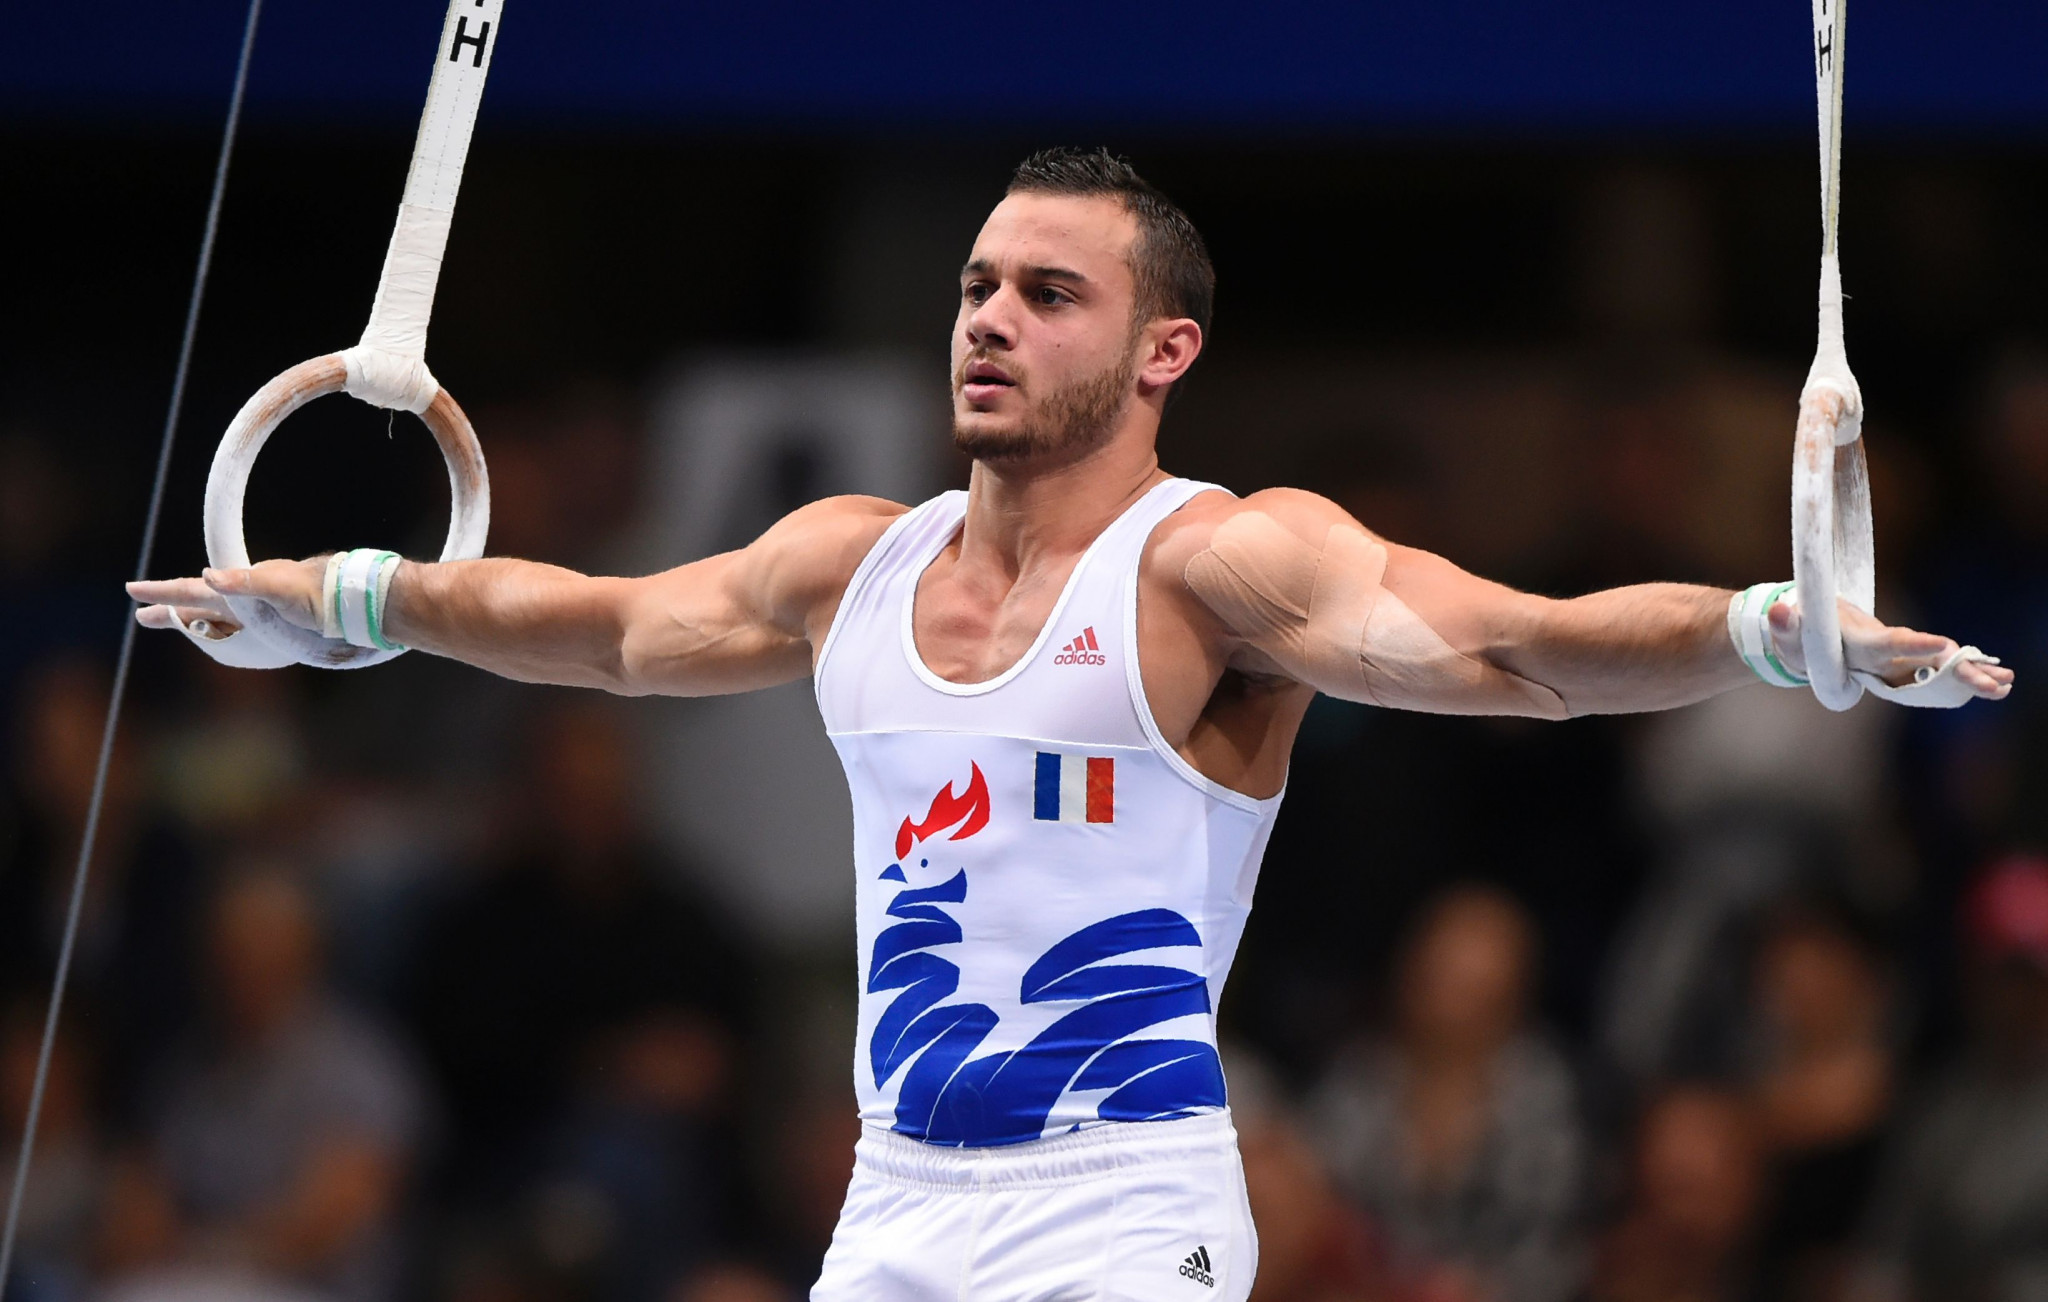 Hosts celebrate multiple victories at FIG World Challenge Cup Series in Paris